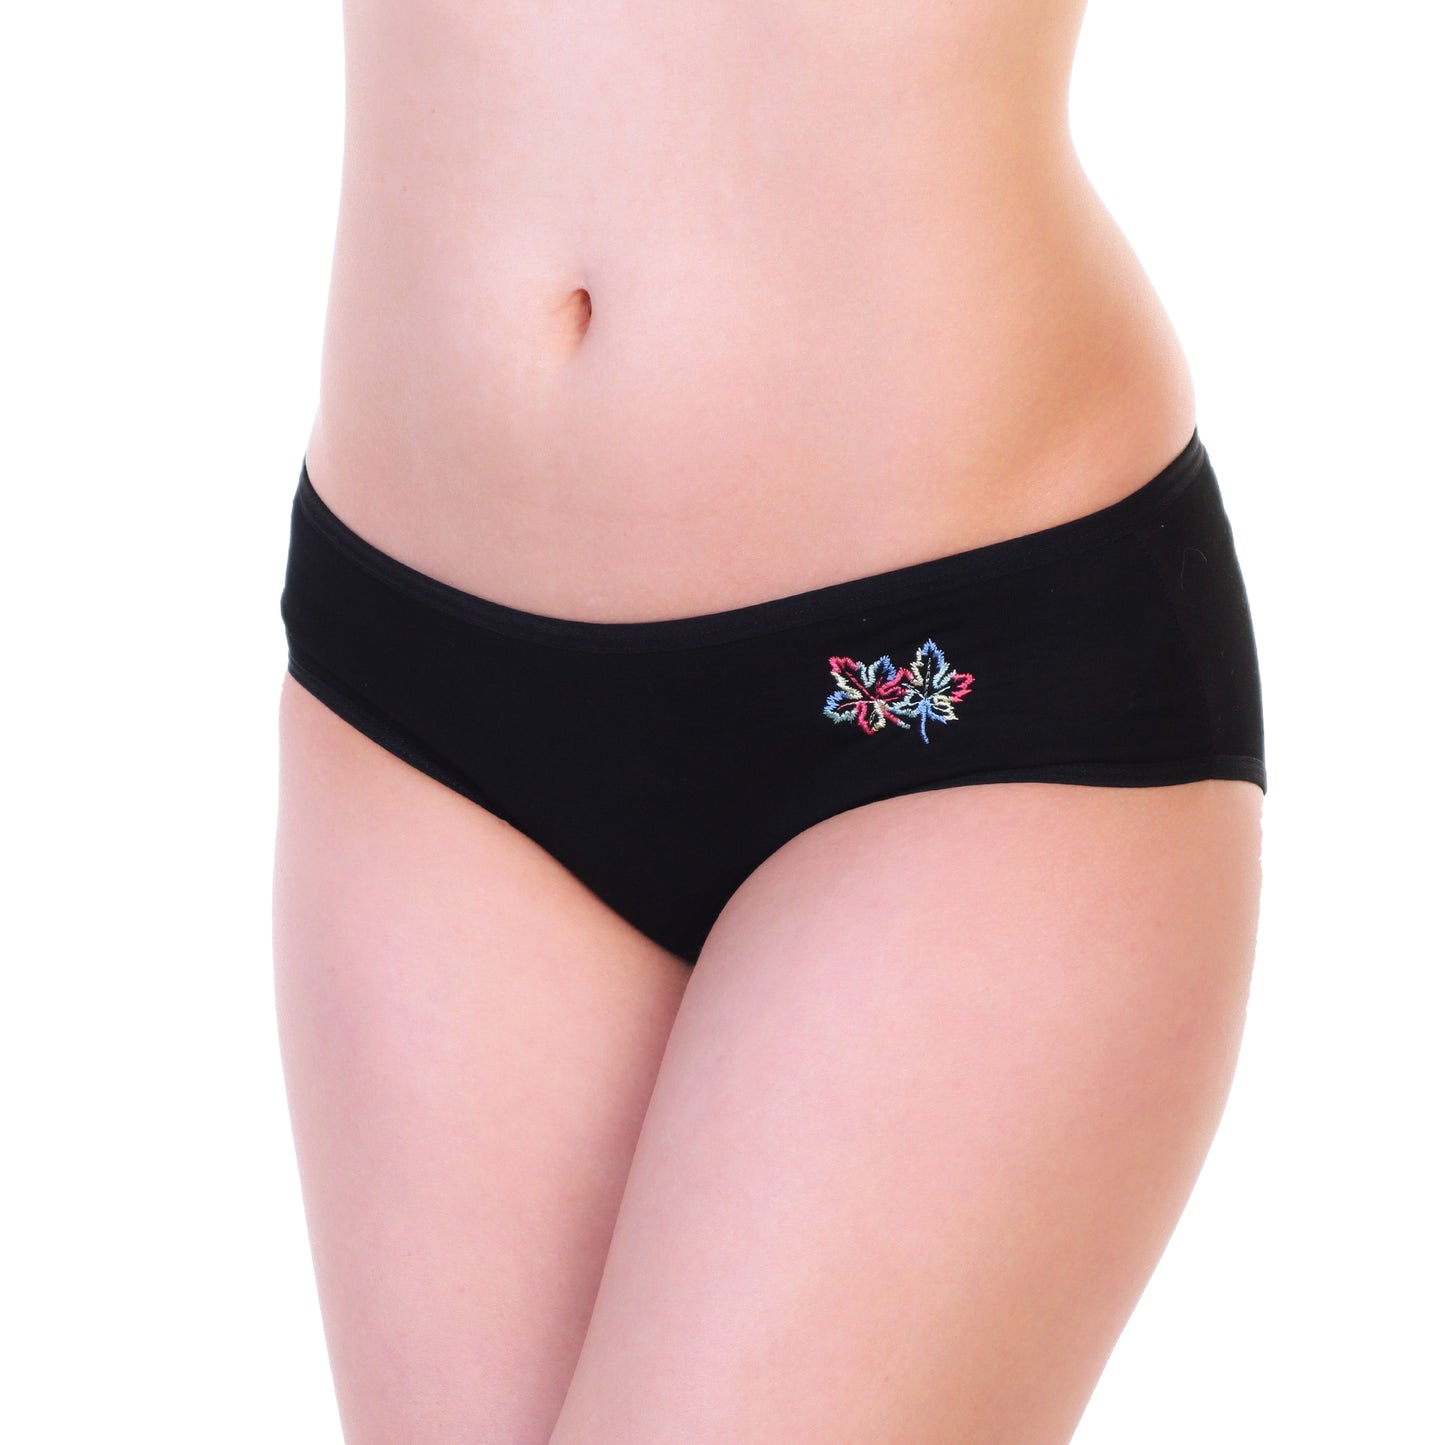 Angelina Cotton Hiphugger Panties with Embroidered Leaf Design (12-Pack), #G6676